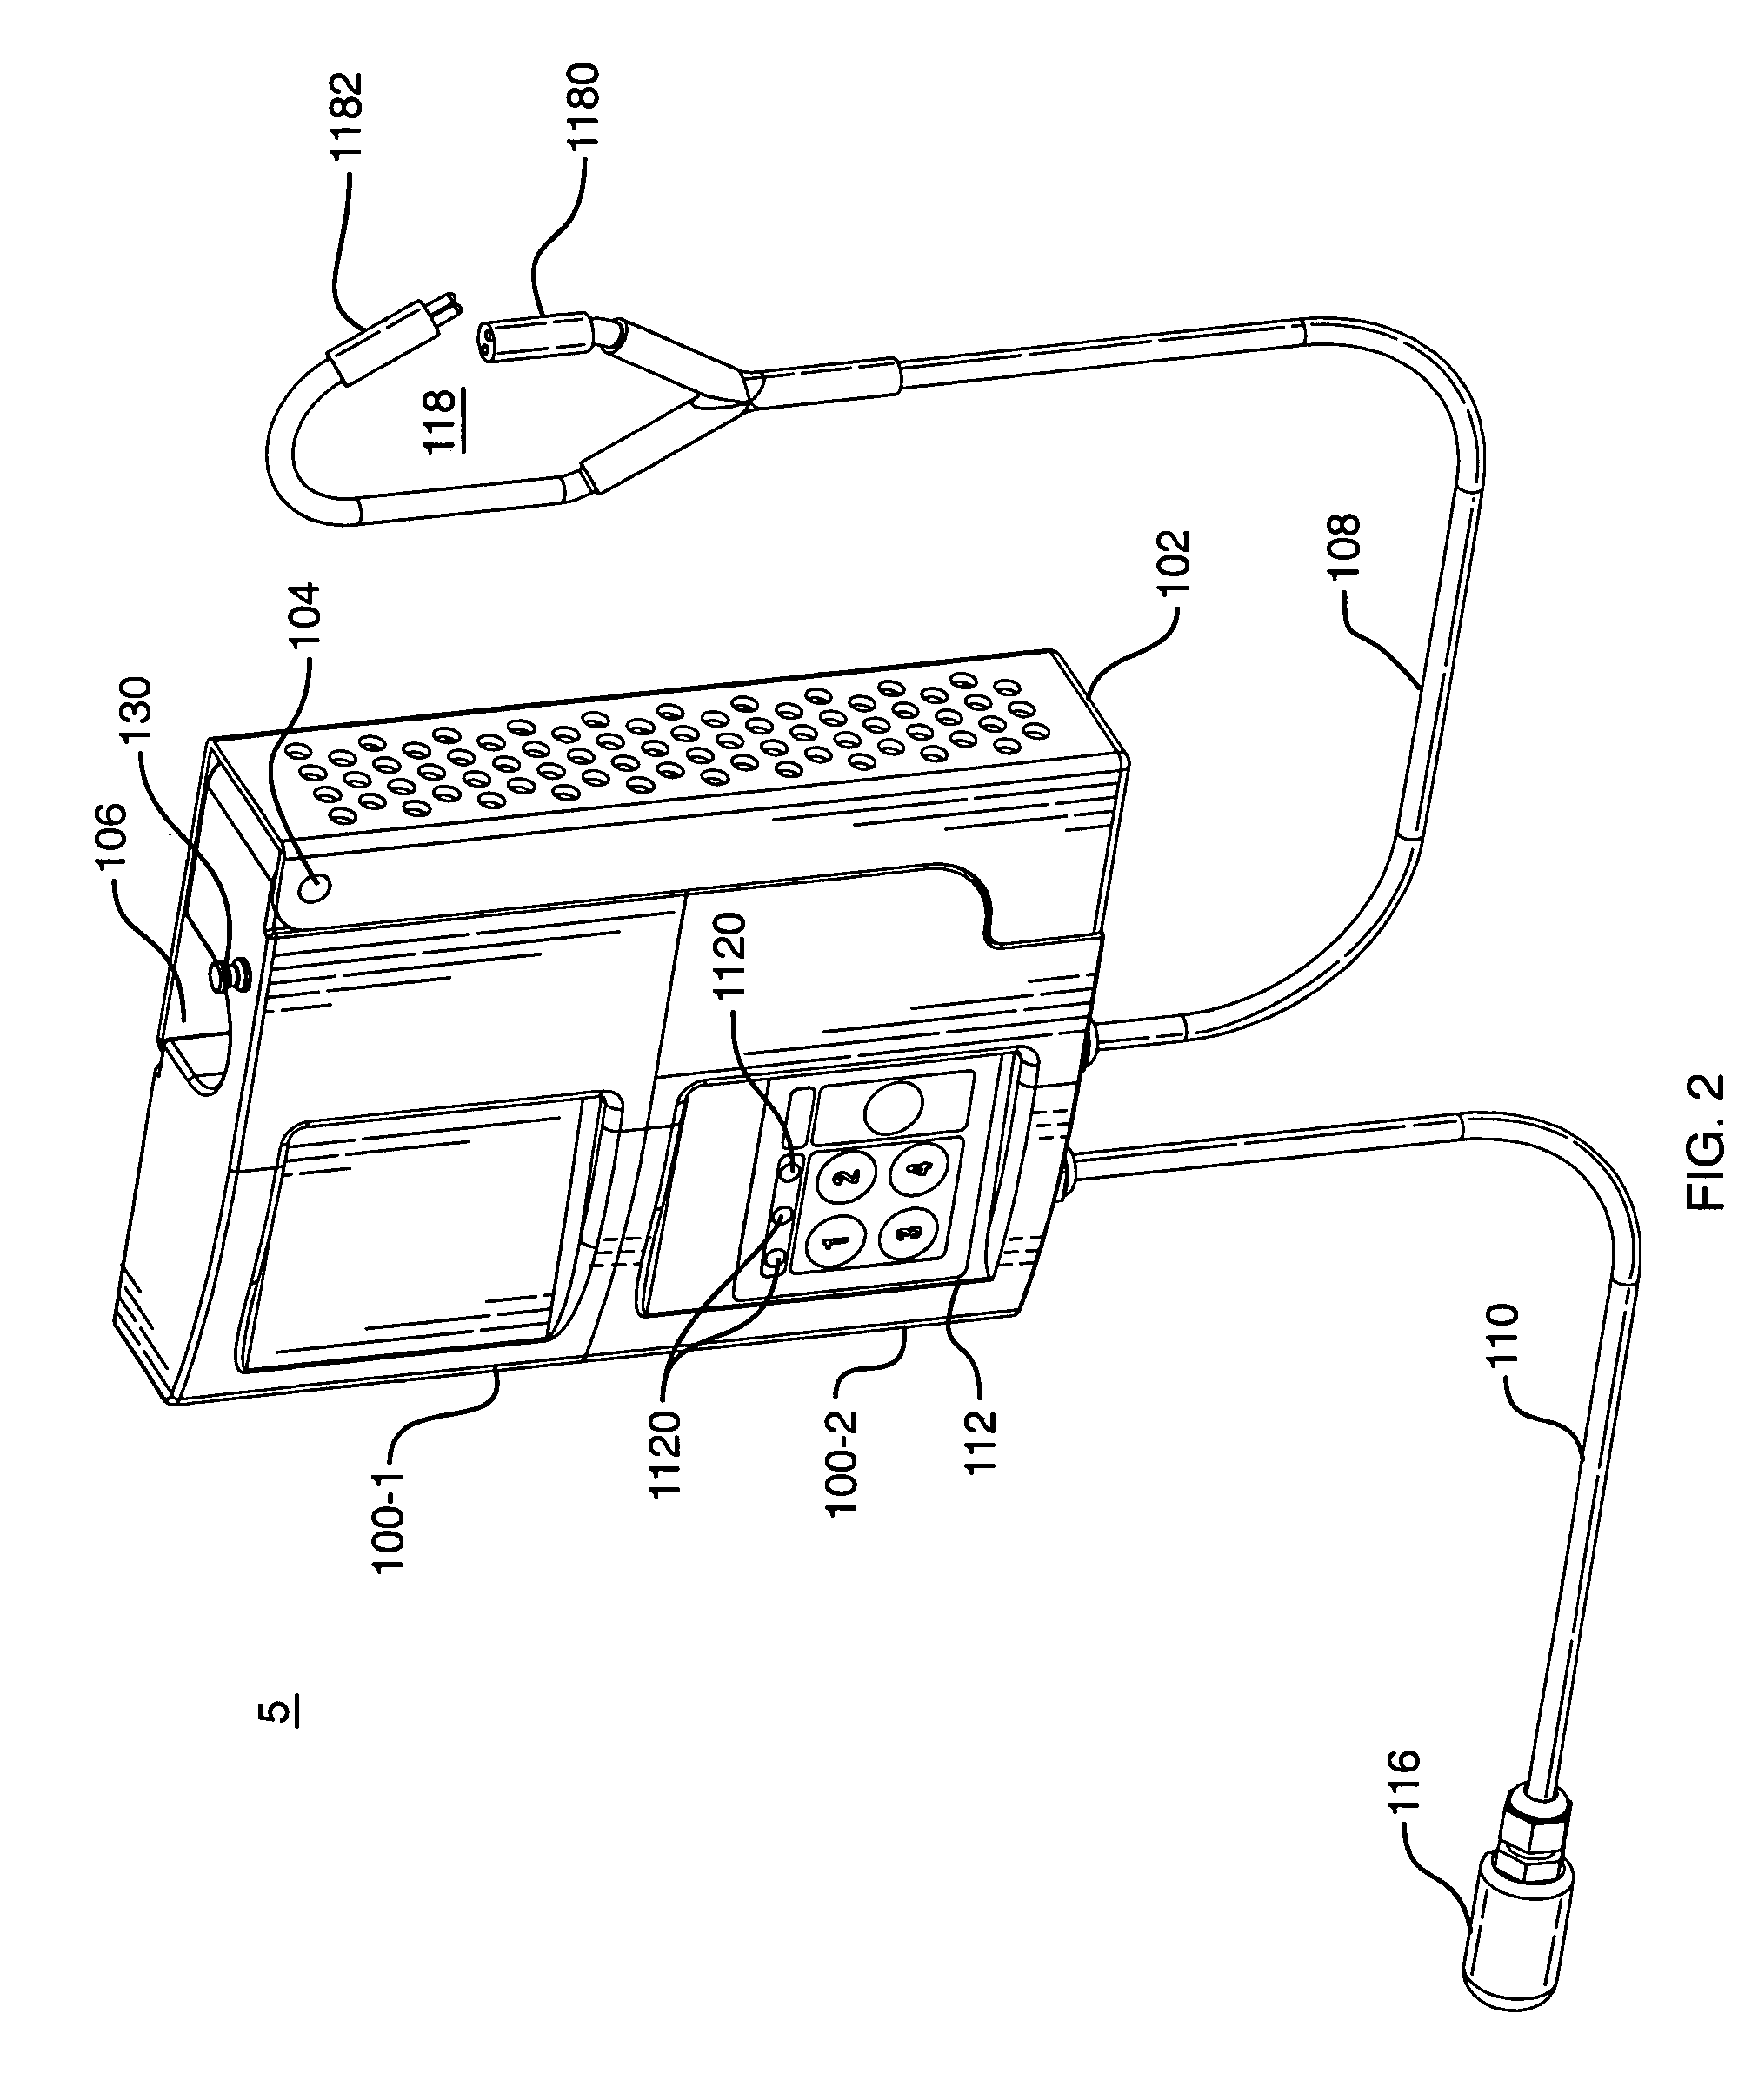 Reusable self contained electronic device providing in-transit cargo visibility